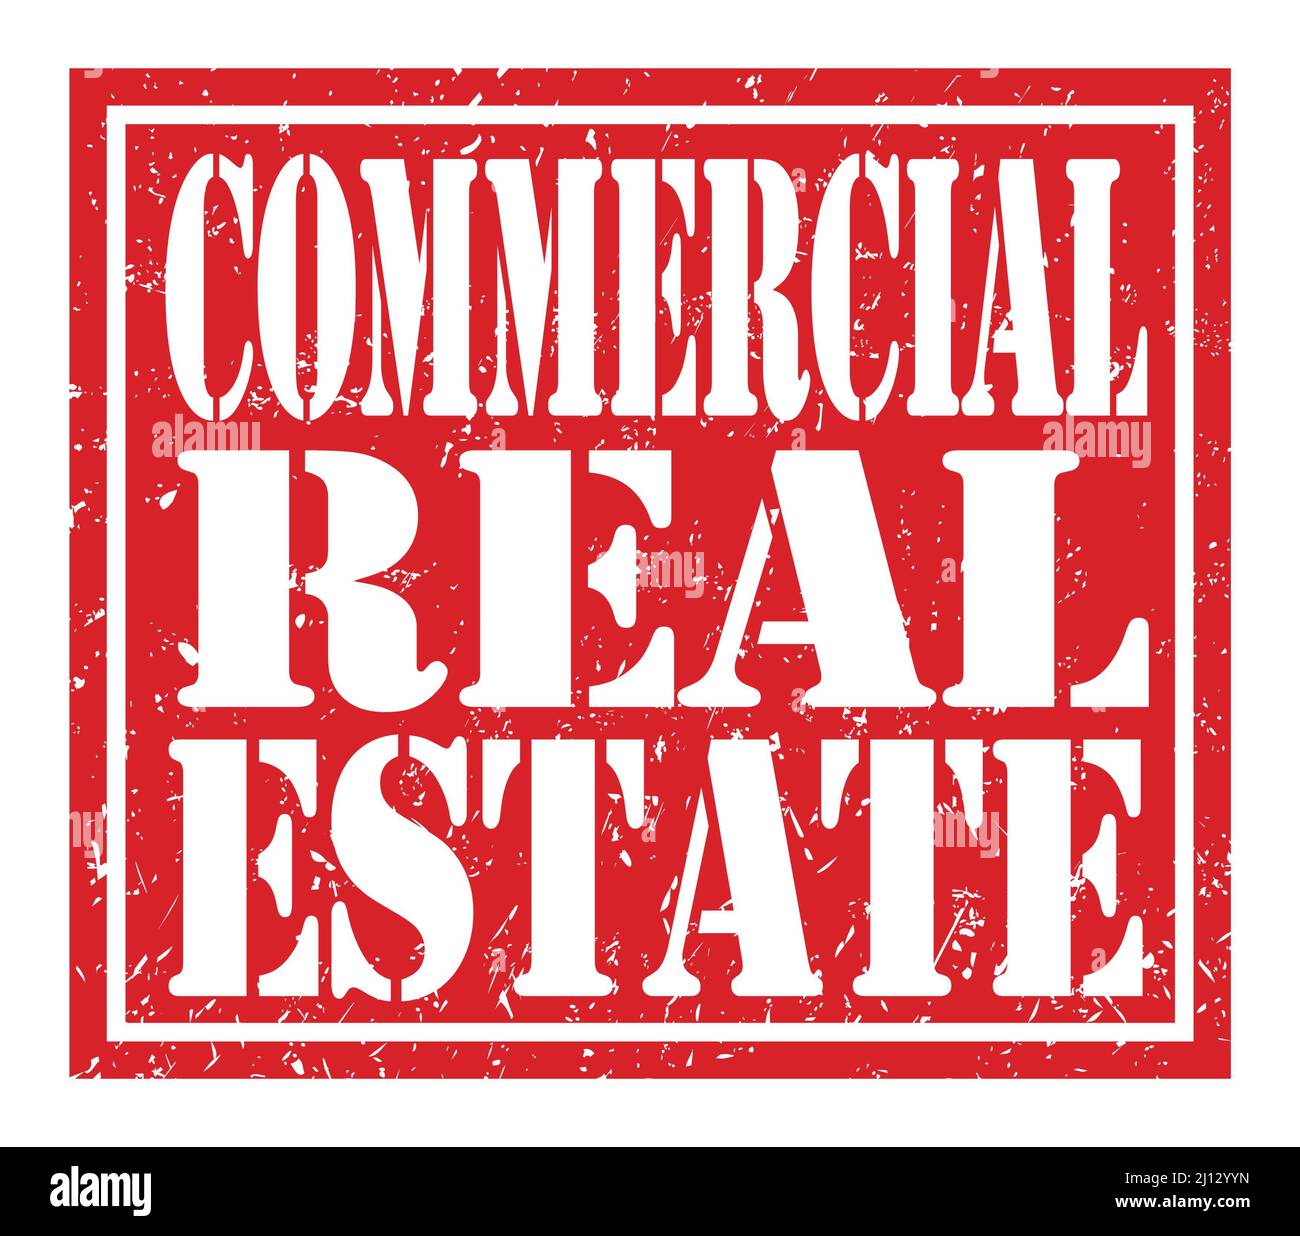 COMMERCIAL REAL ESTATE, words written on red stamp sign Stock Photo